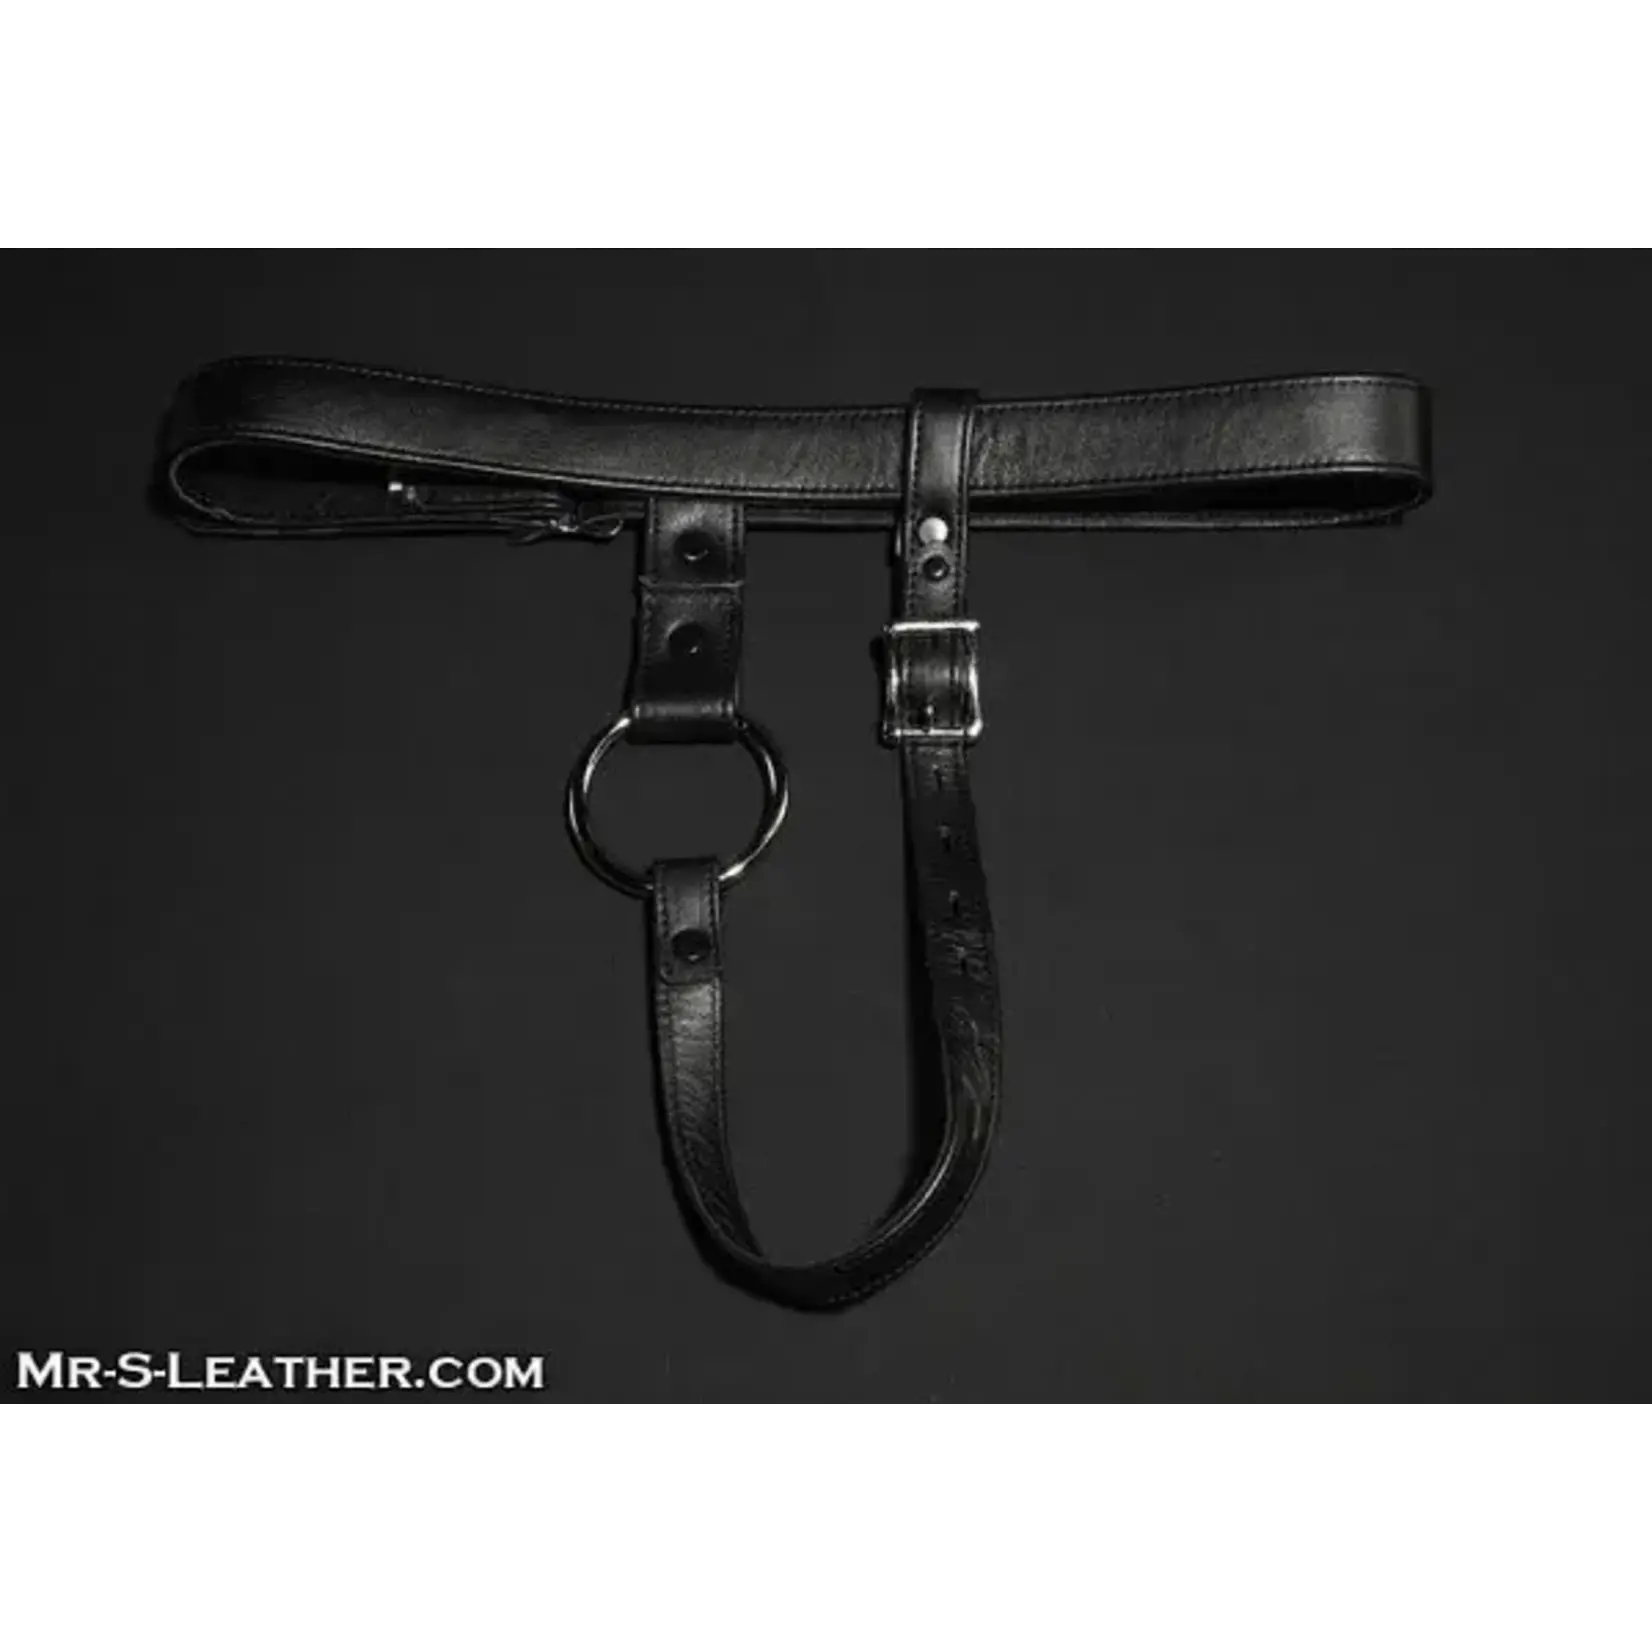 Mr. S Leather Mr. S Leather - Deluxe Locking Leather Butt Plug Harness